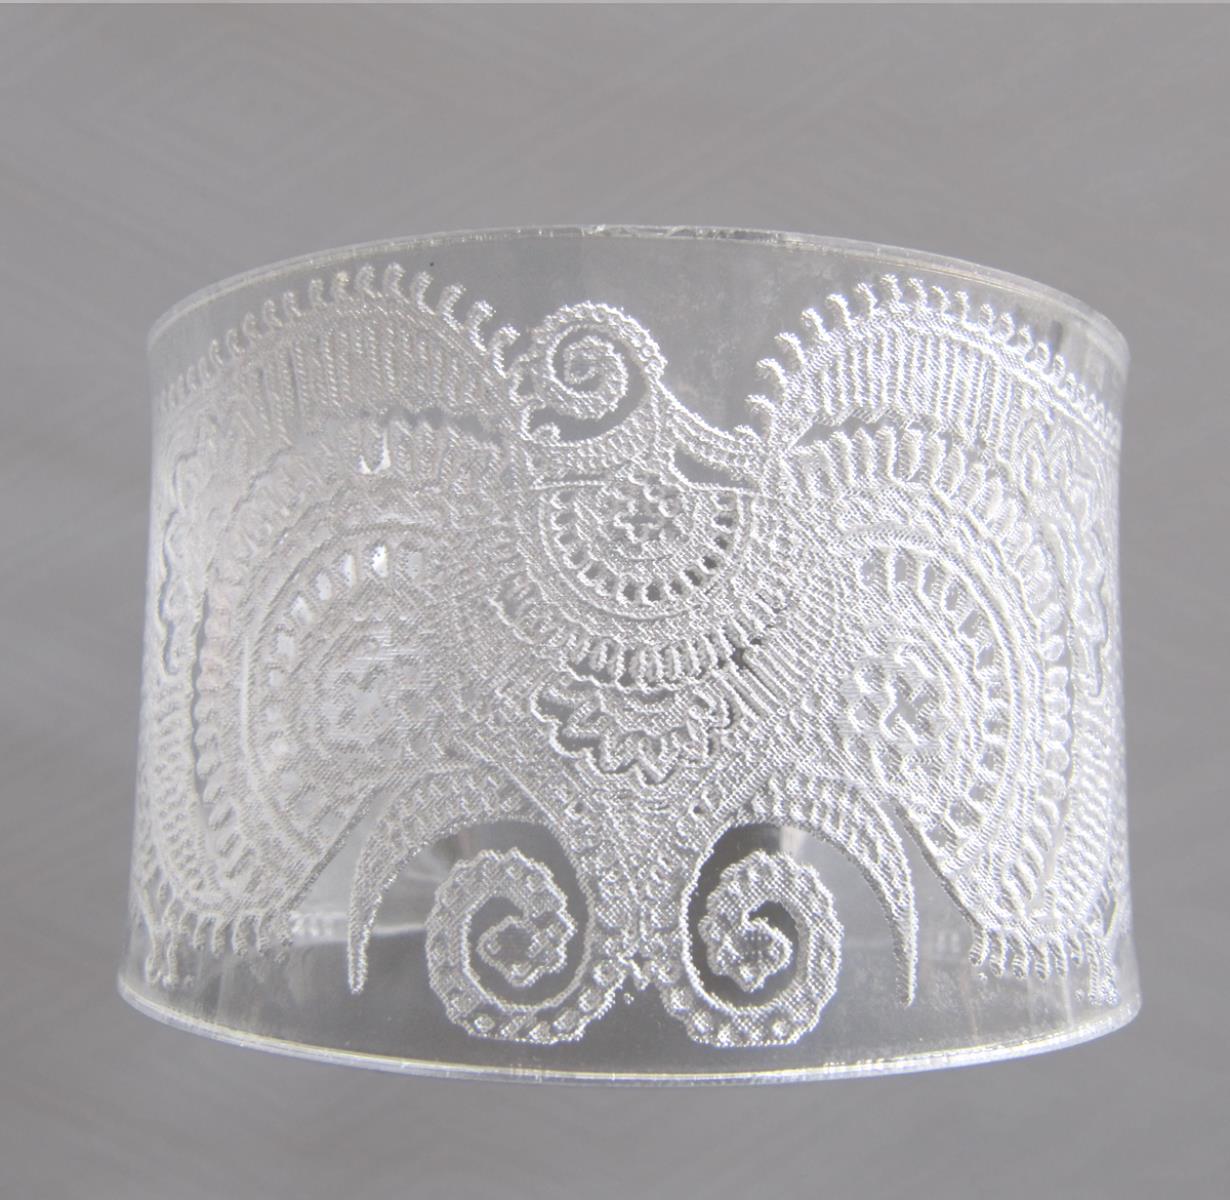 0114_Winged Lace.jpg